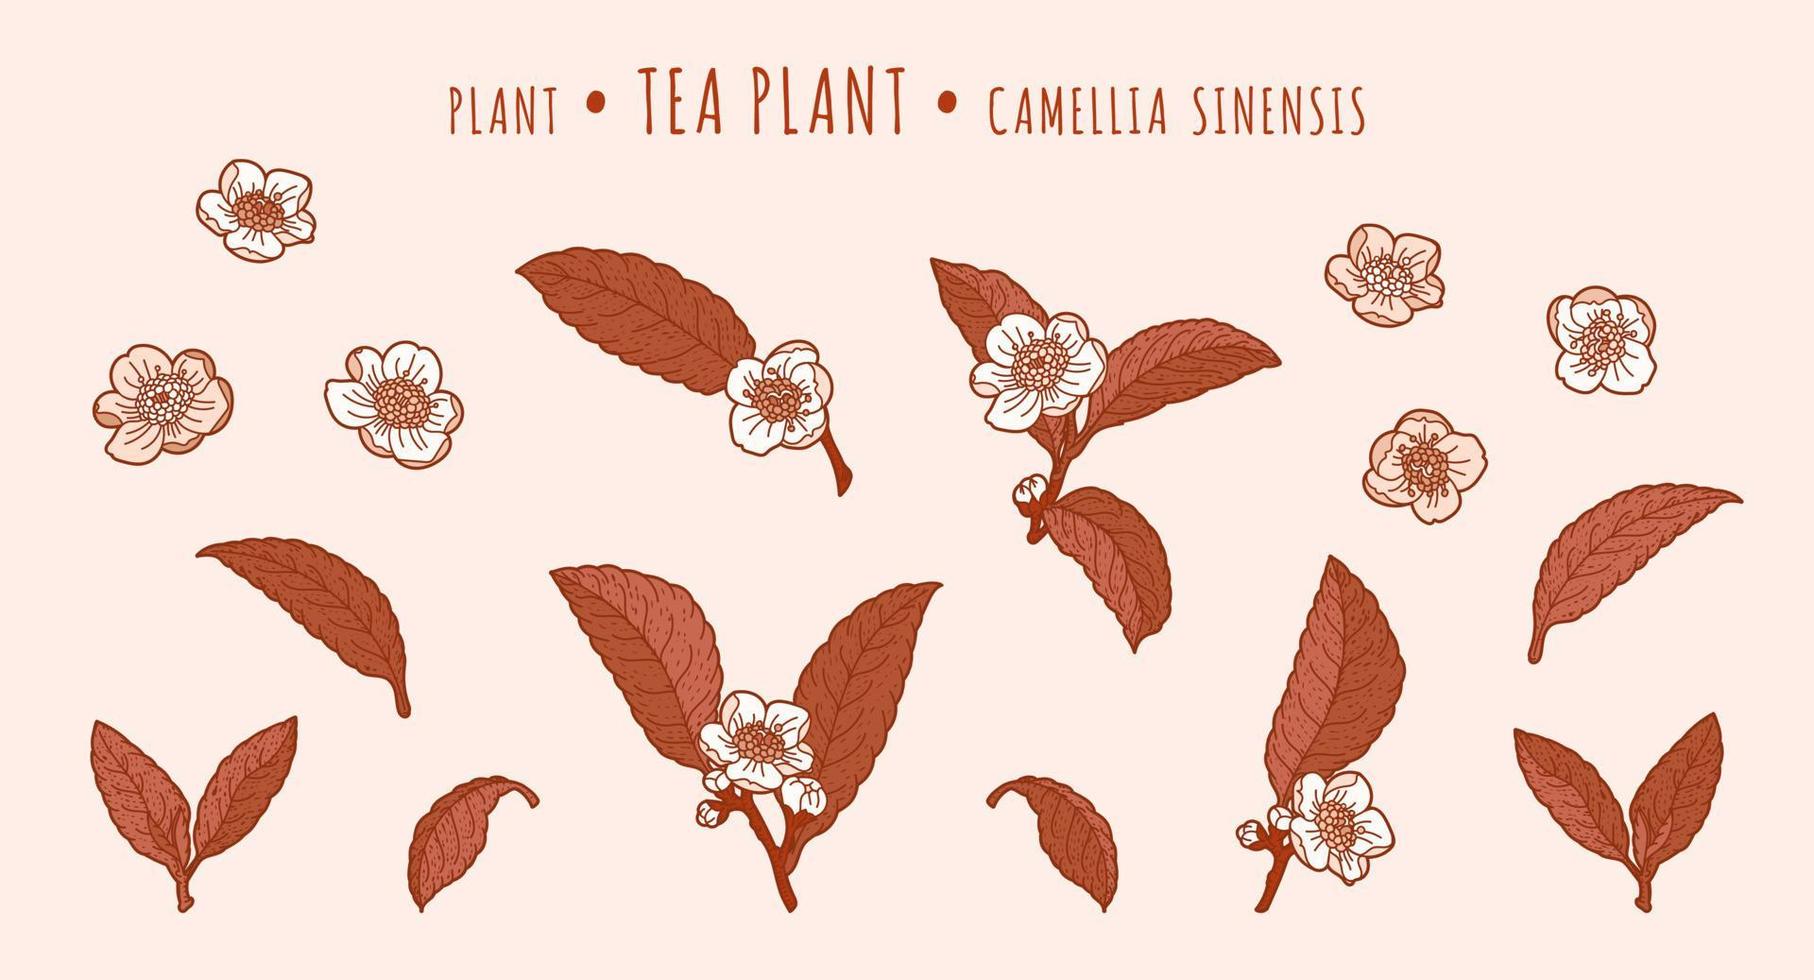 Tea plant. Camellia leaves and flowers on a branches in the hand-drawn technique vector